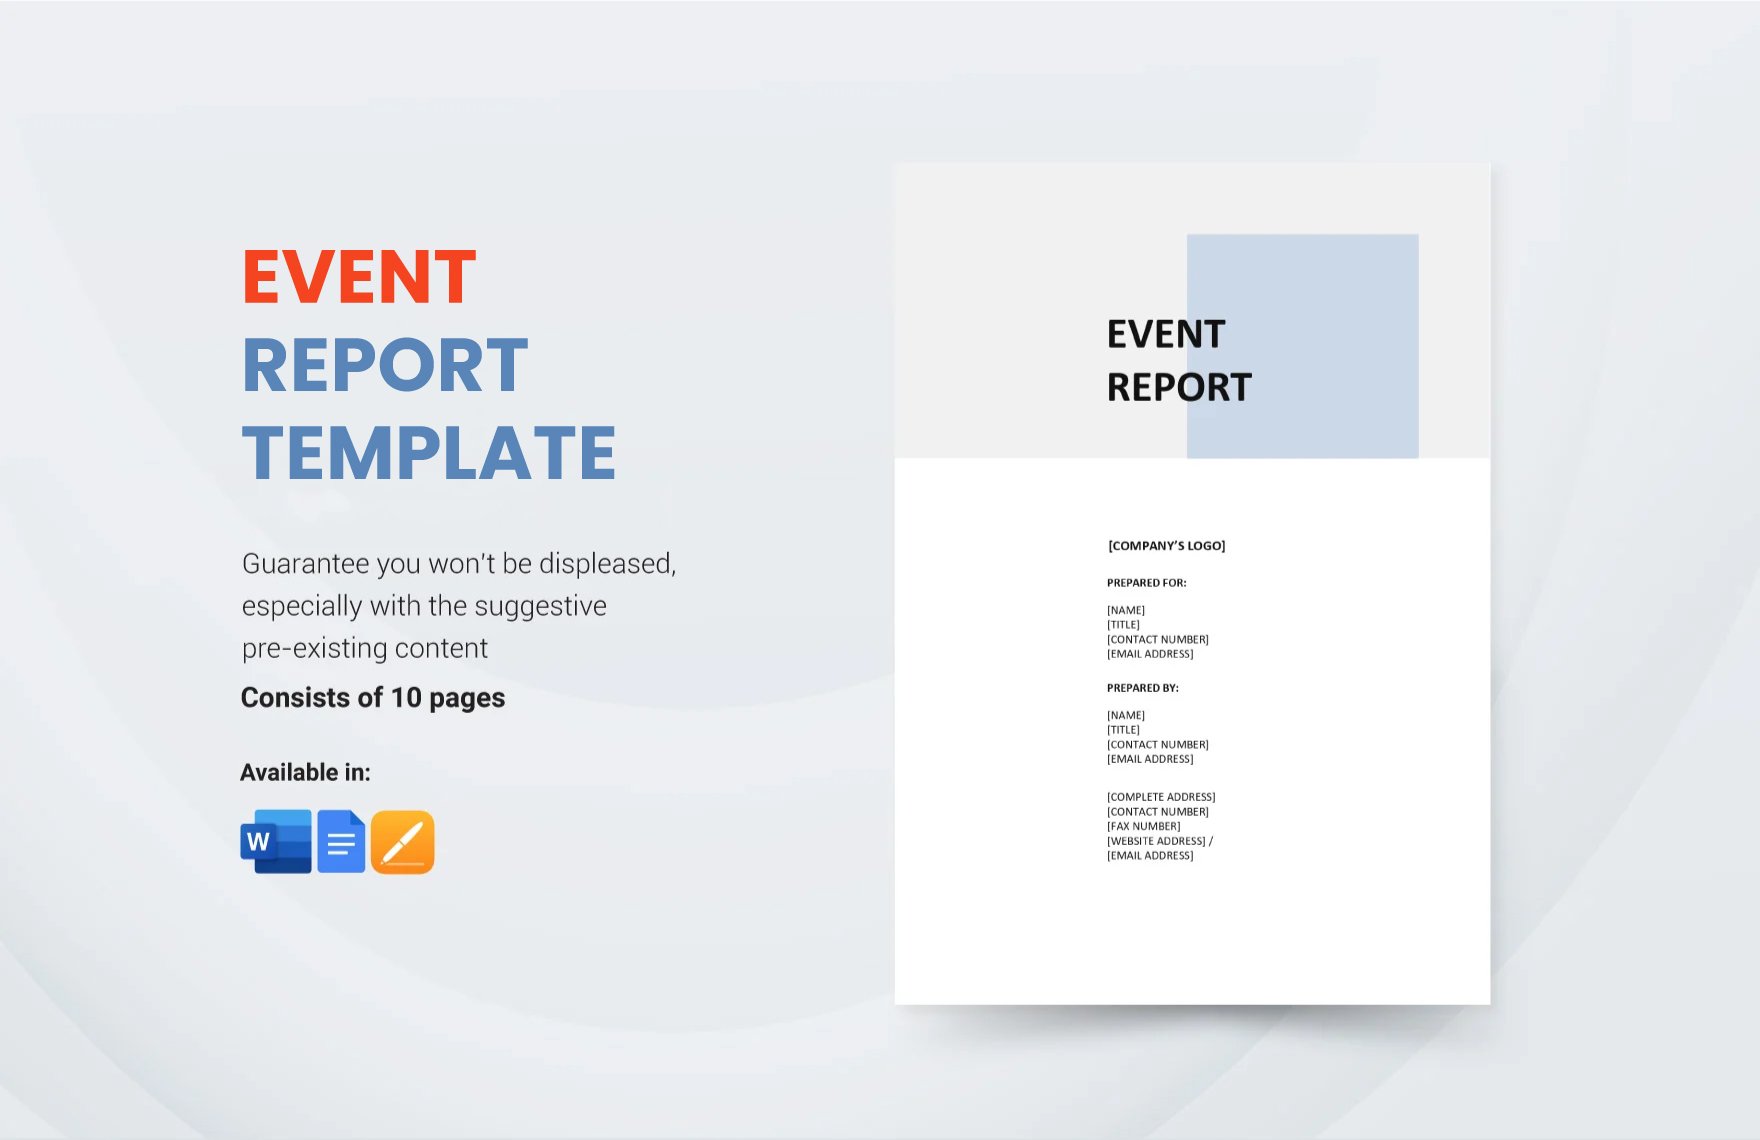 Free Event Report Template in Word, Google Docs, Apple Pages